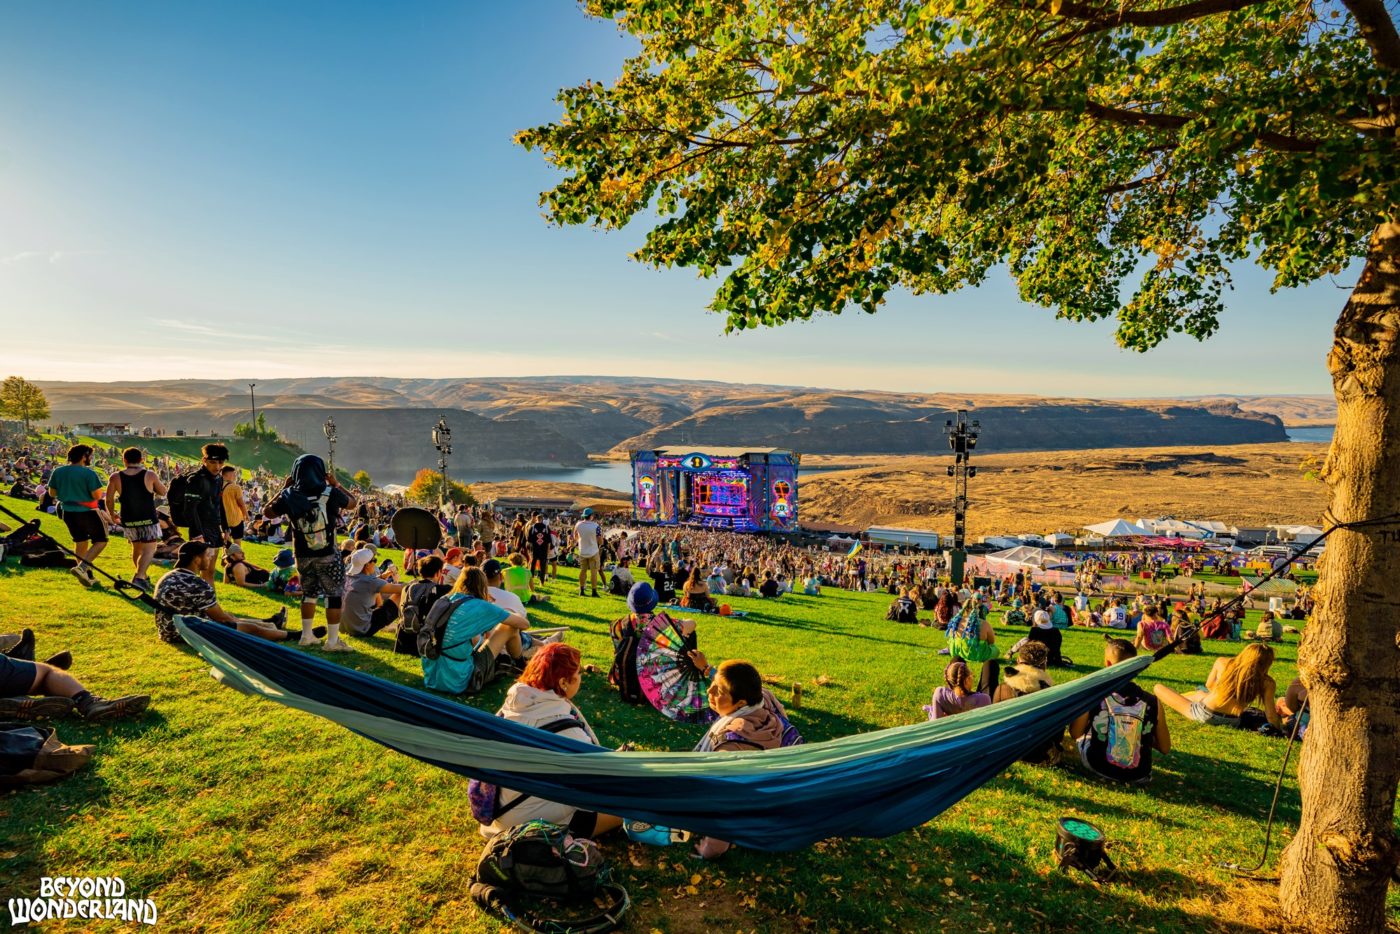 People sitting in hammock, overlooking a hill, a stage, and a river beyond it.